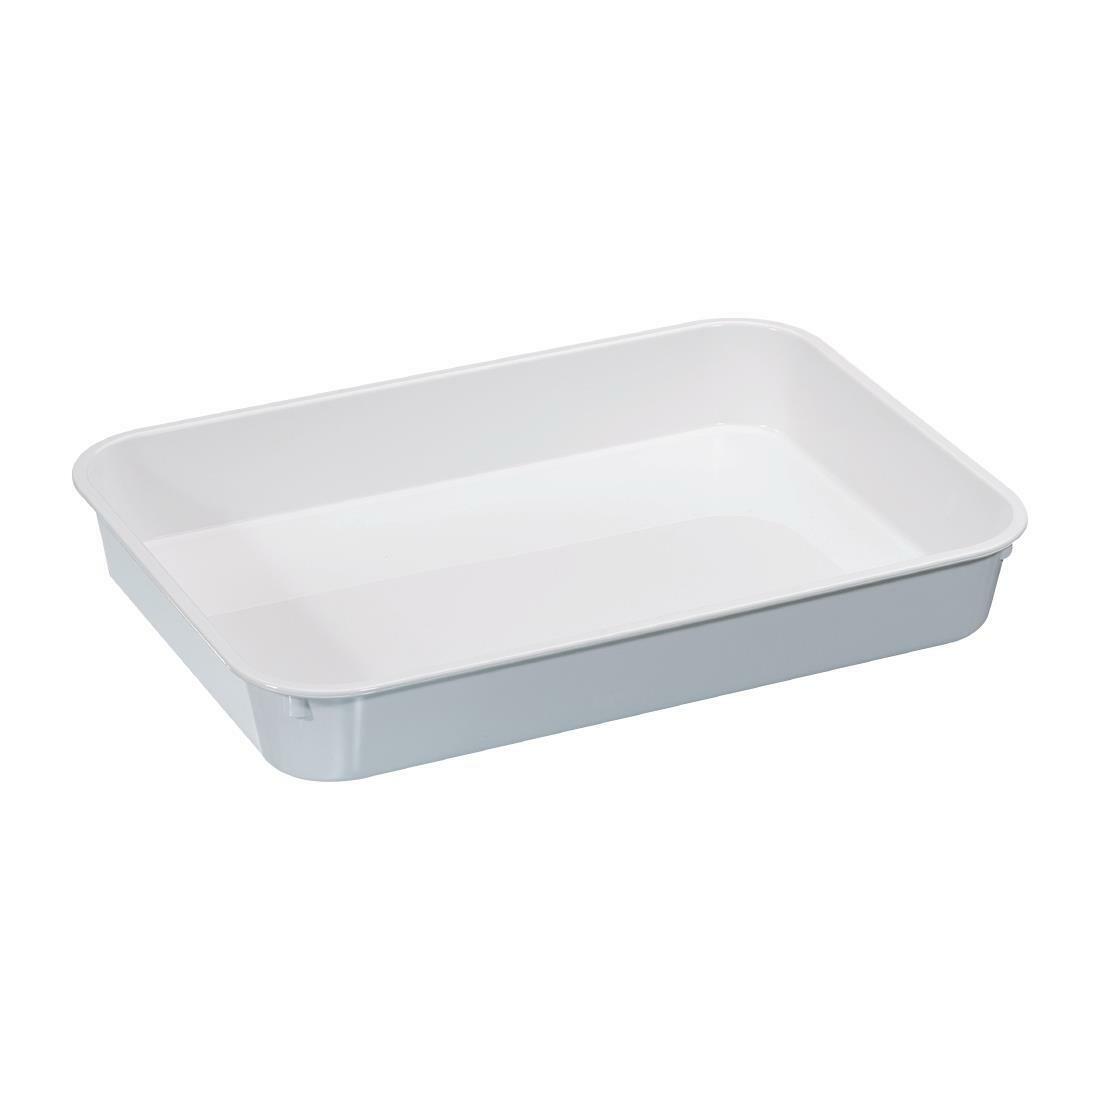 Rectangular Plastic Trays (9 Trays - Red, White, Green) Measure 15.4 in x  10.4 in, BPA Free, Dishwaster Safe